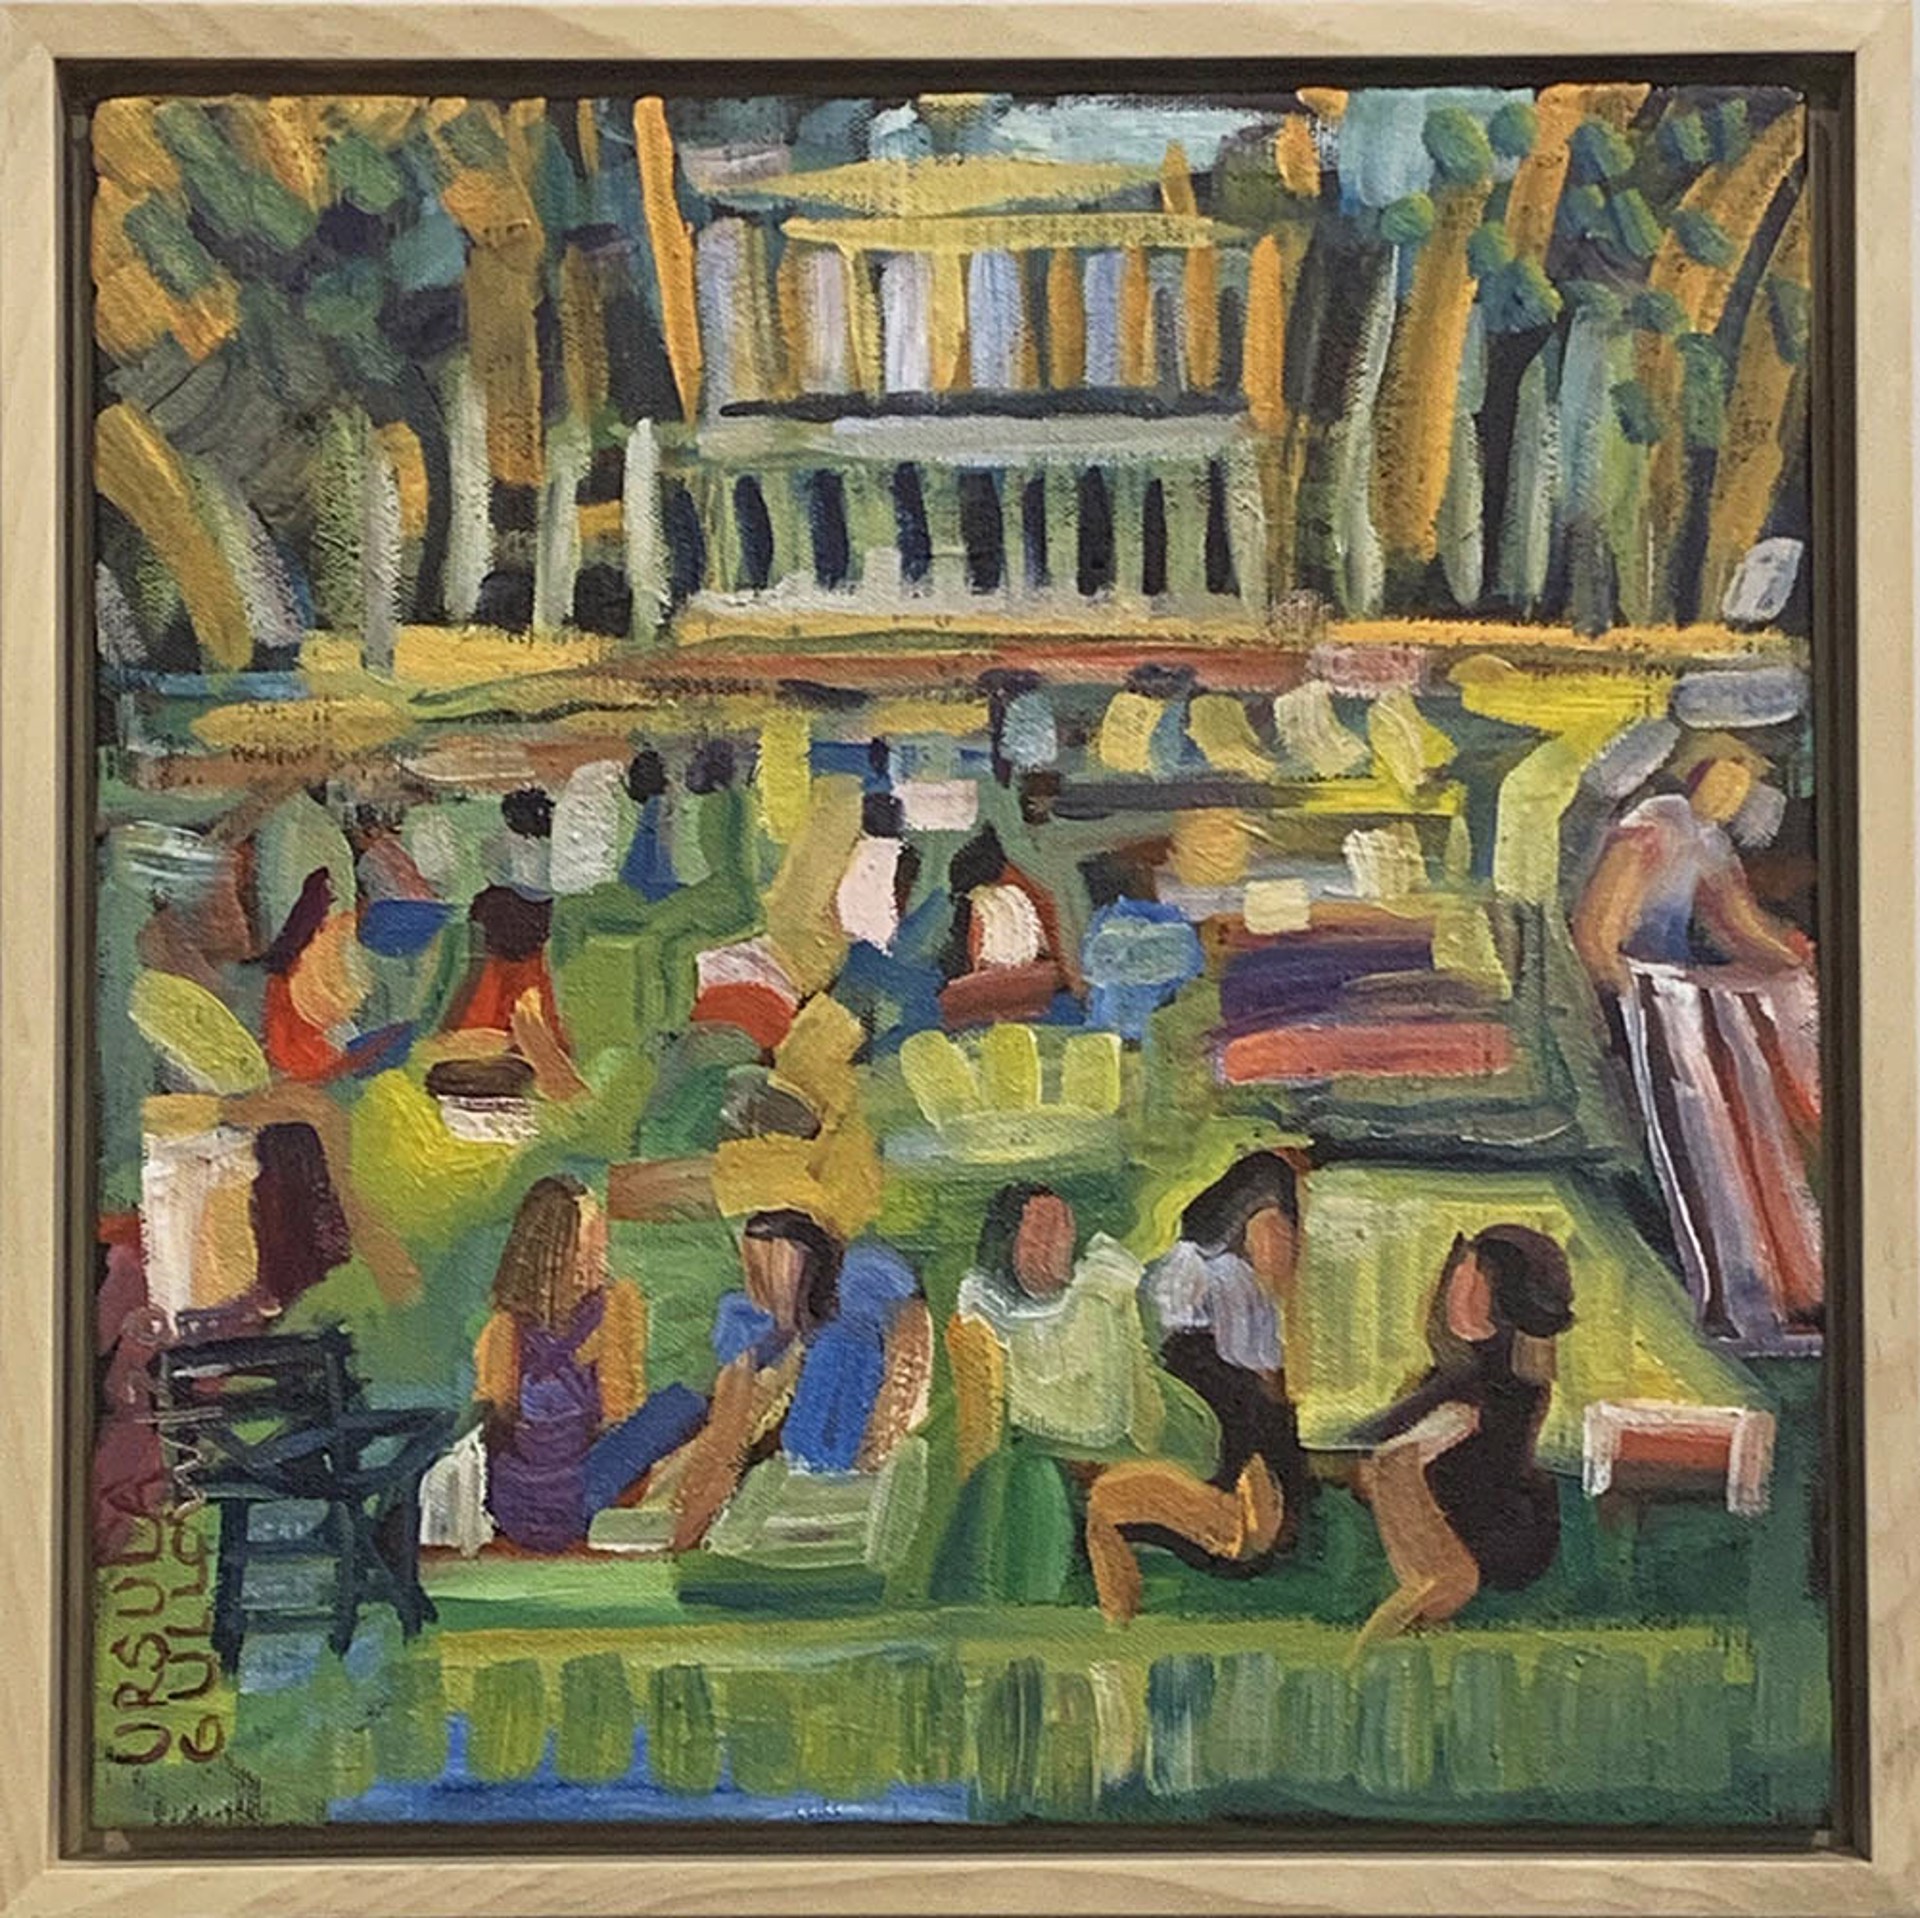 Park Picnic by Ursula Gullow